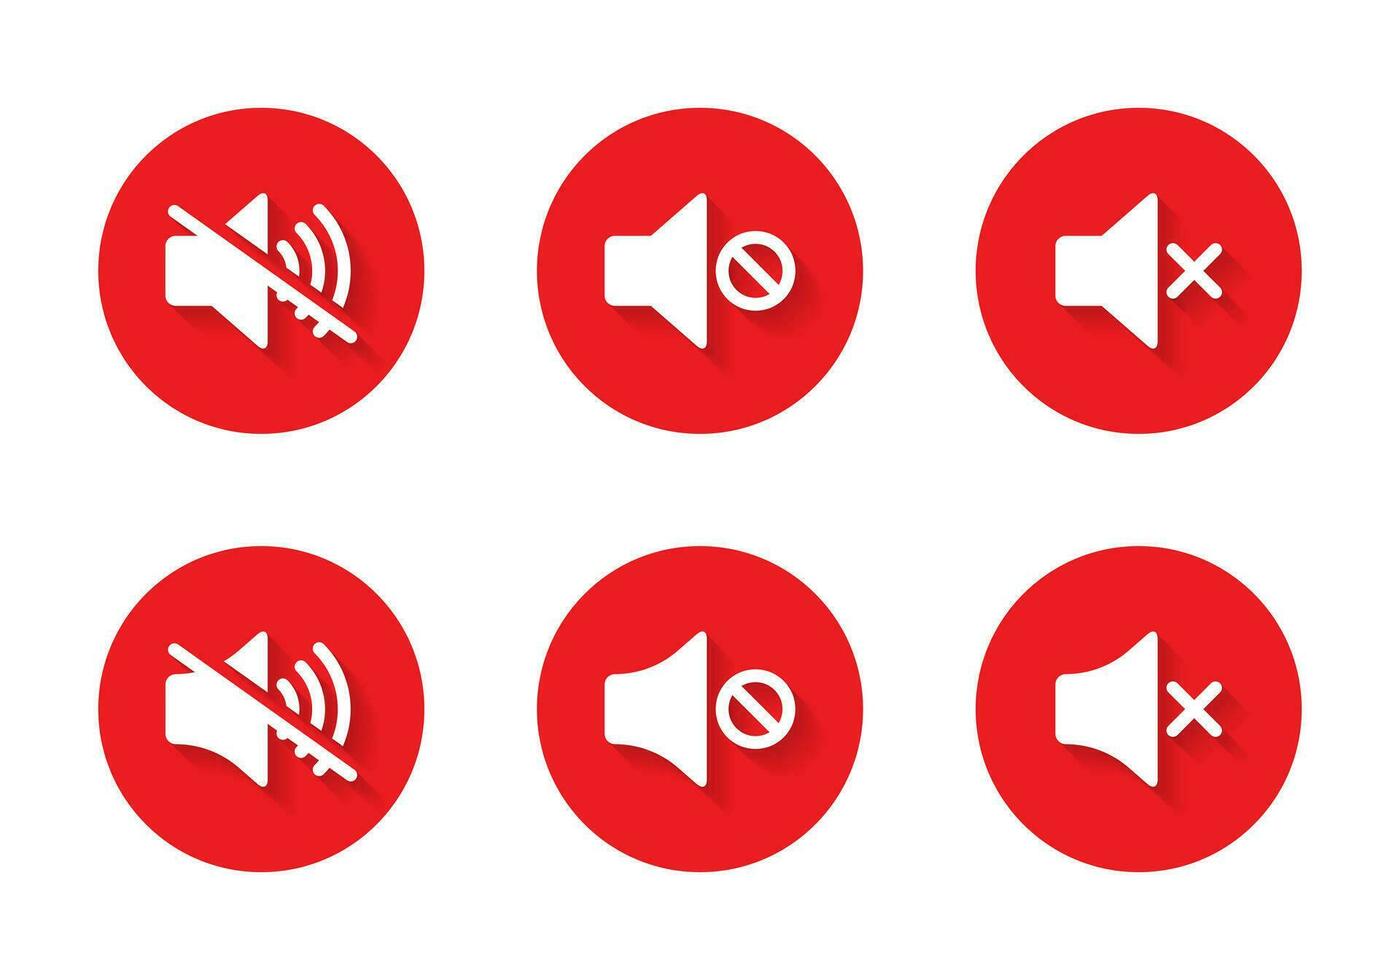 Mute speaker, no sound icon vector on red circle. Silent symbol with shadow